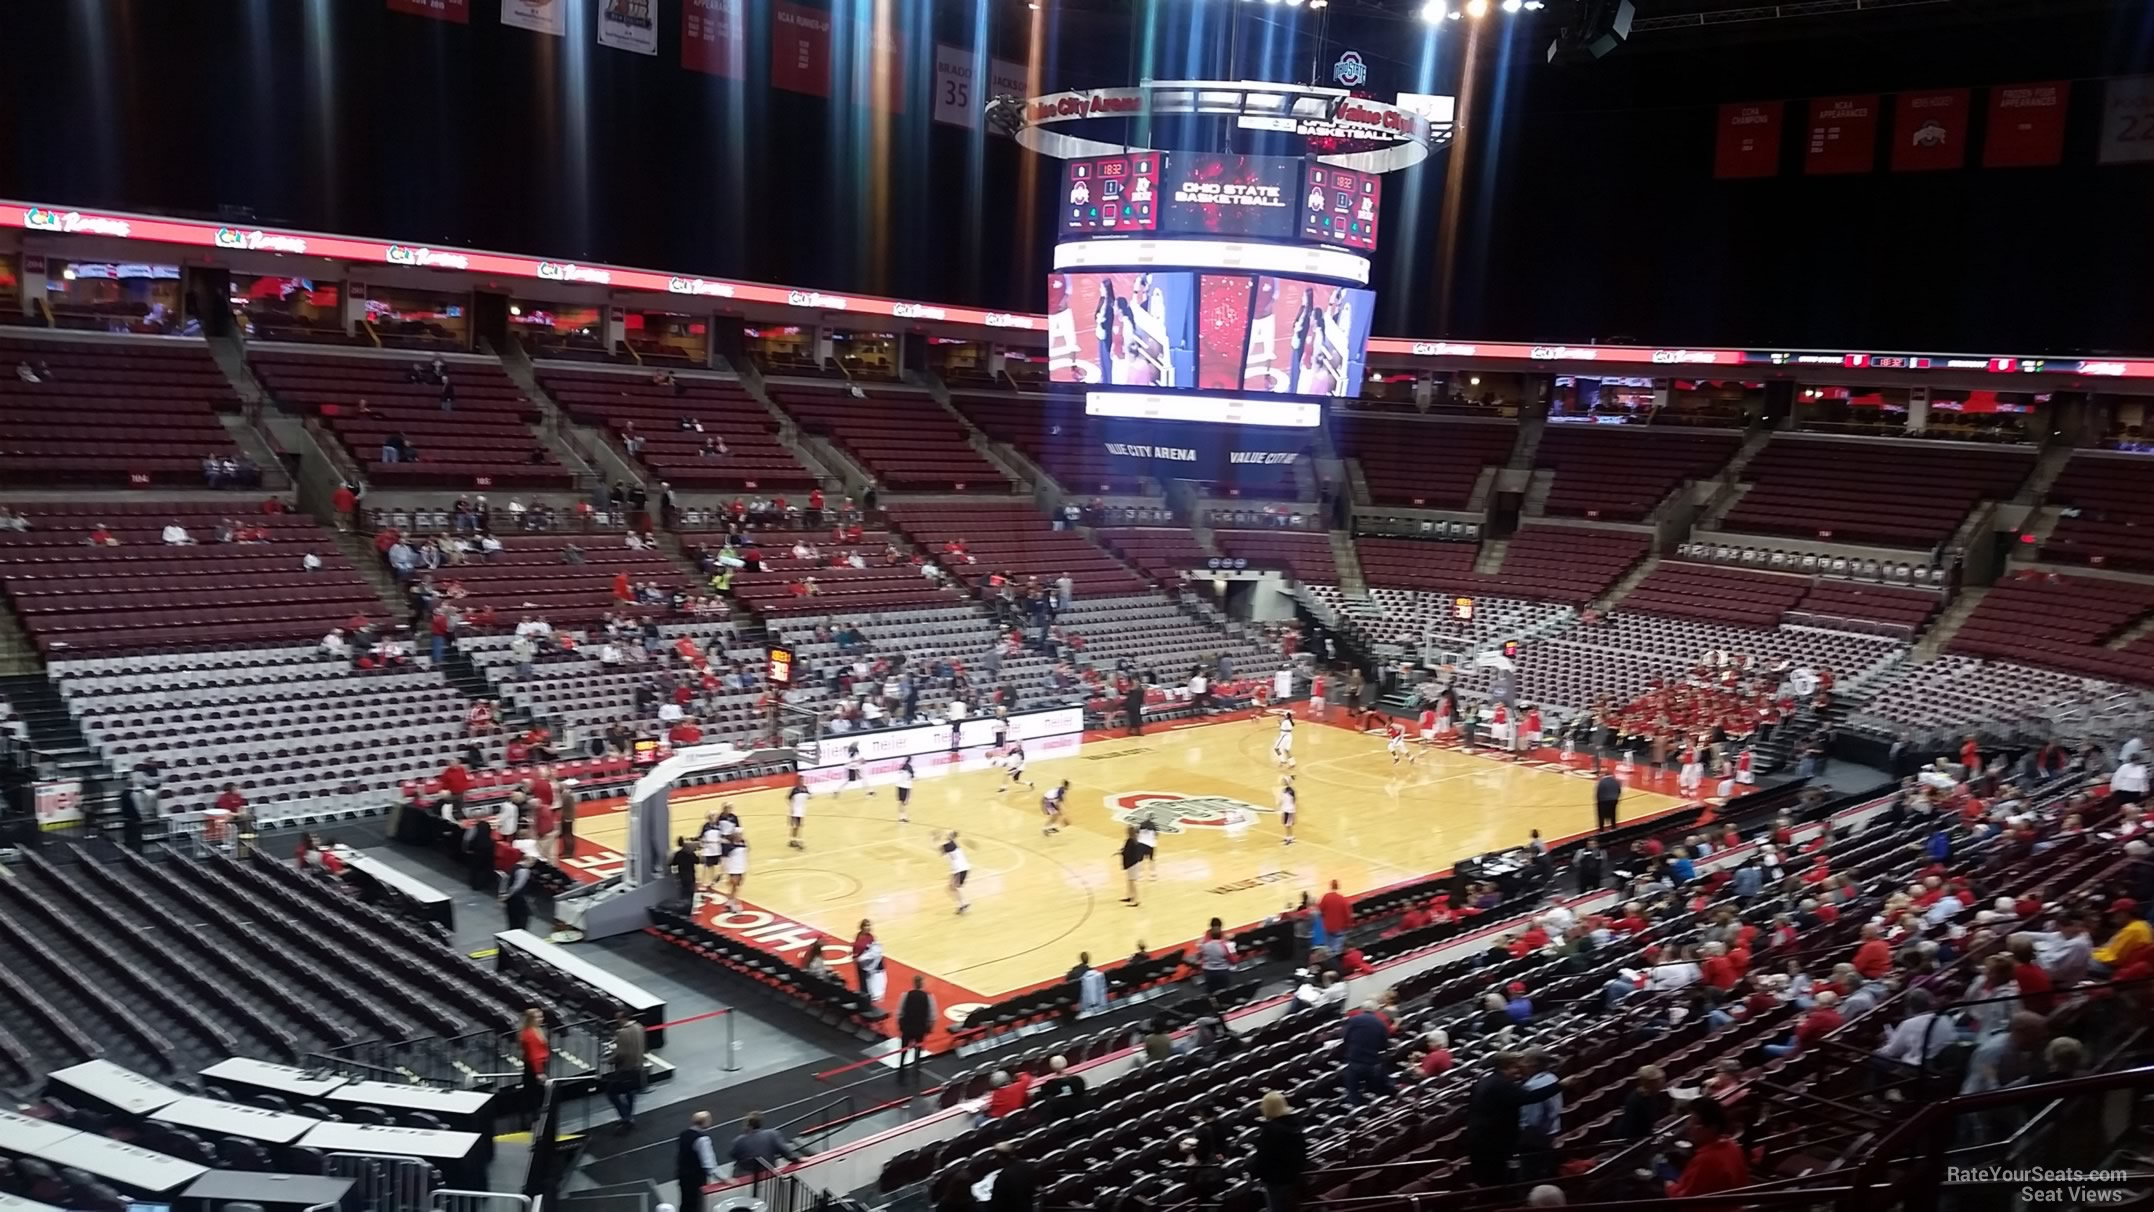 section 227, row h seat view  for basketball - schottenstein center